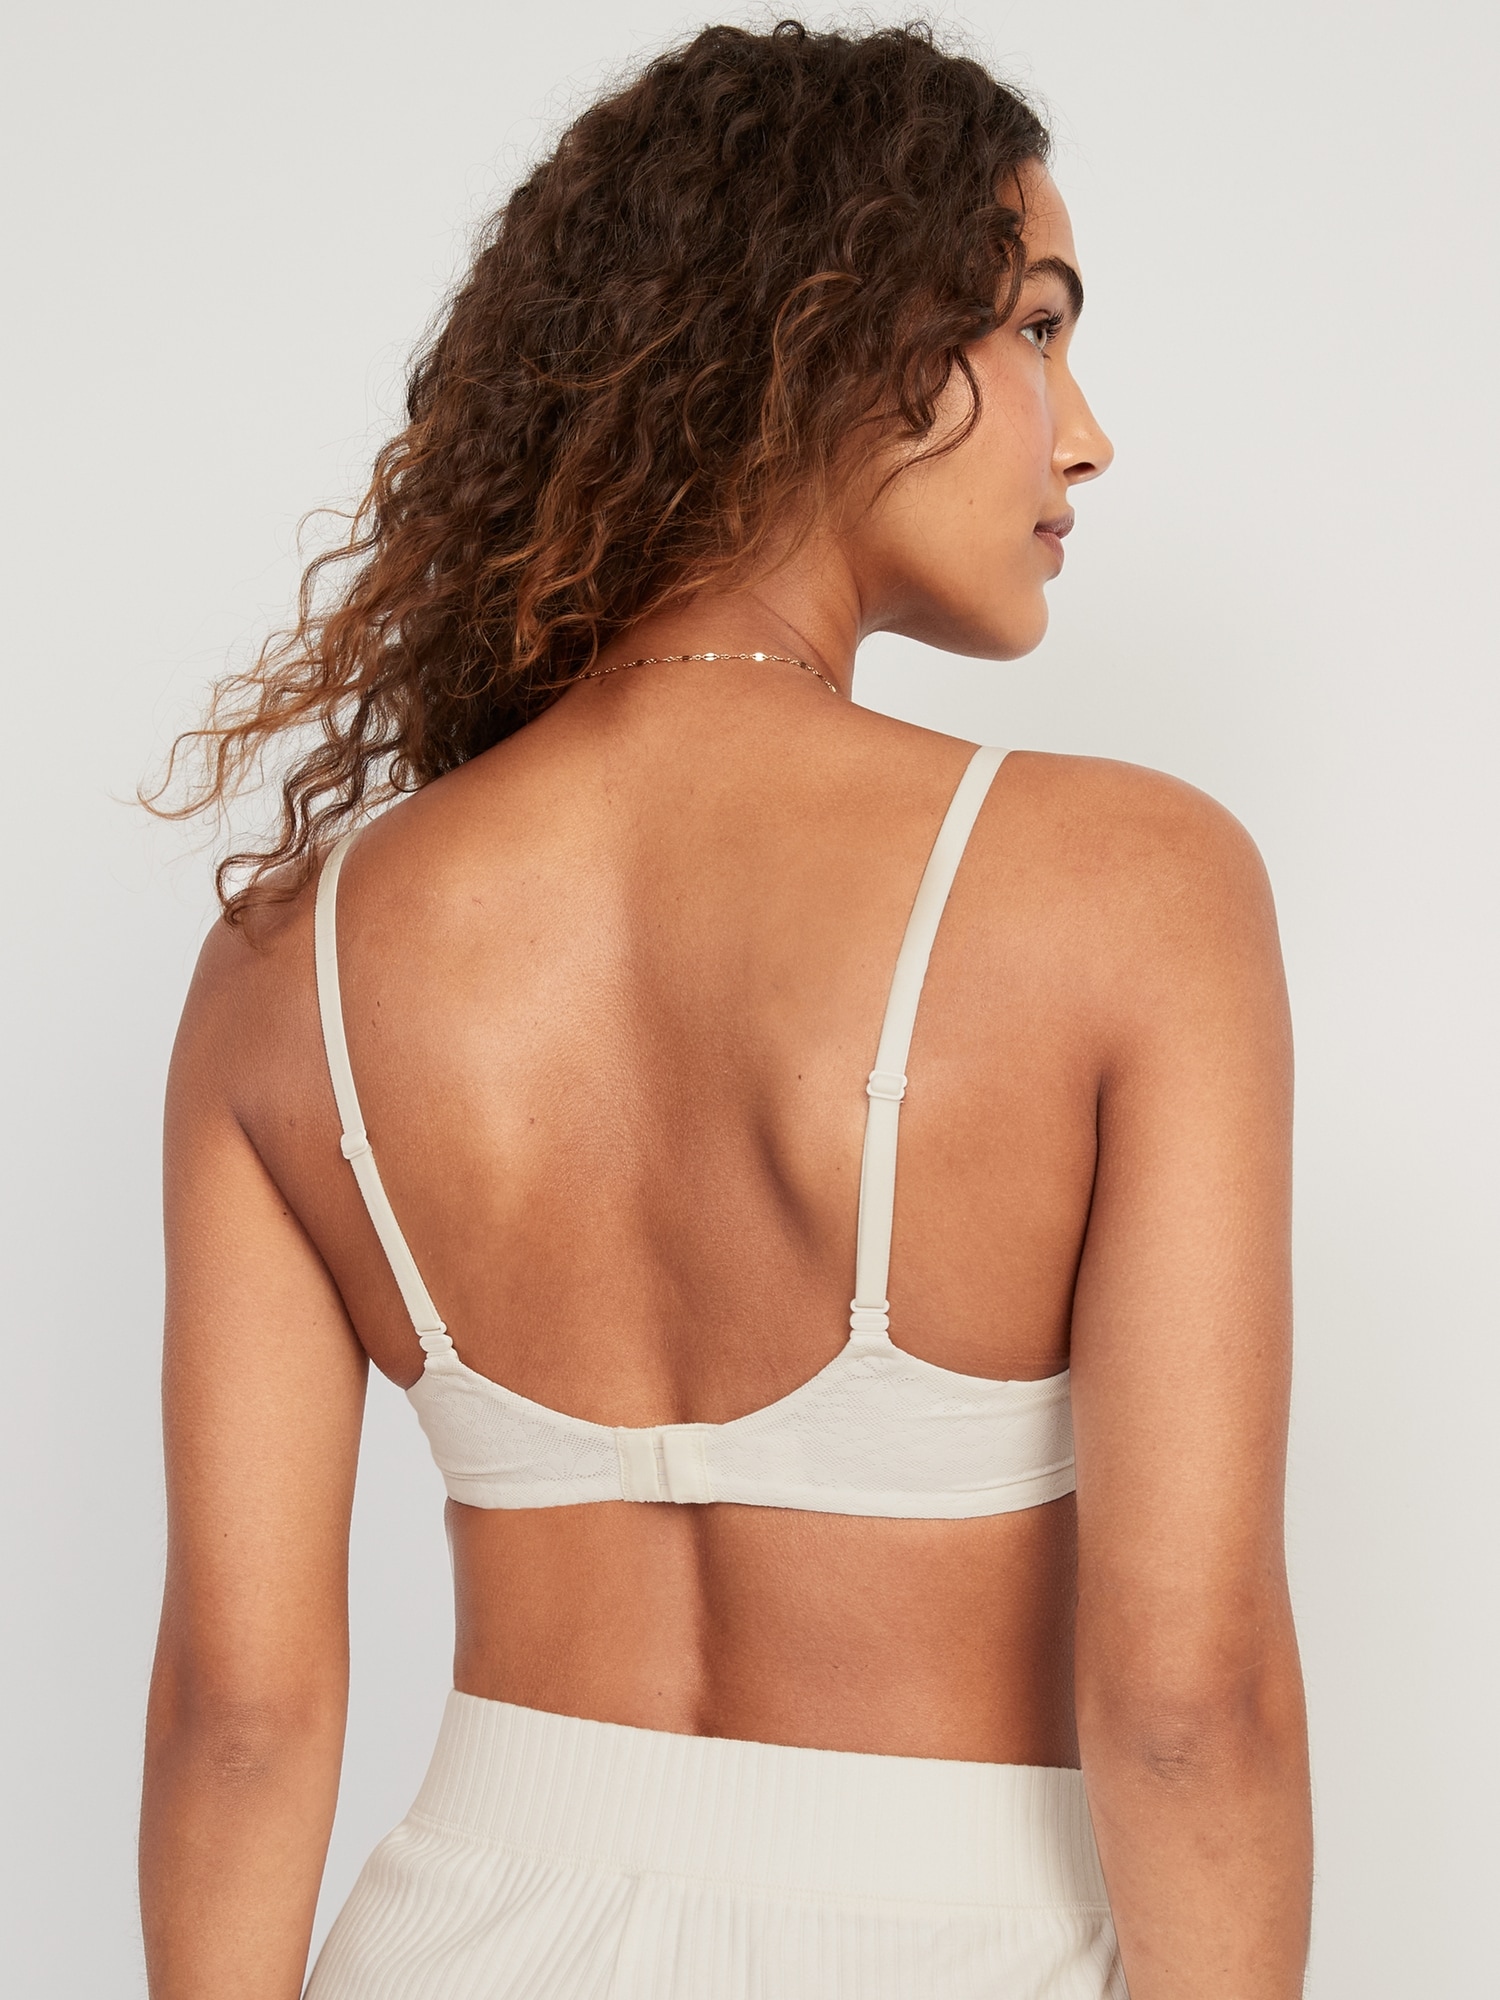 Fortnight: Ivy Classic Lace Underwire Bra - E to G Cups Only – Azaleas